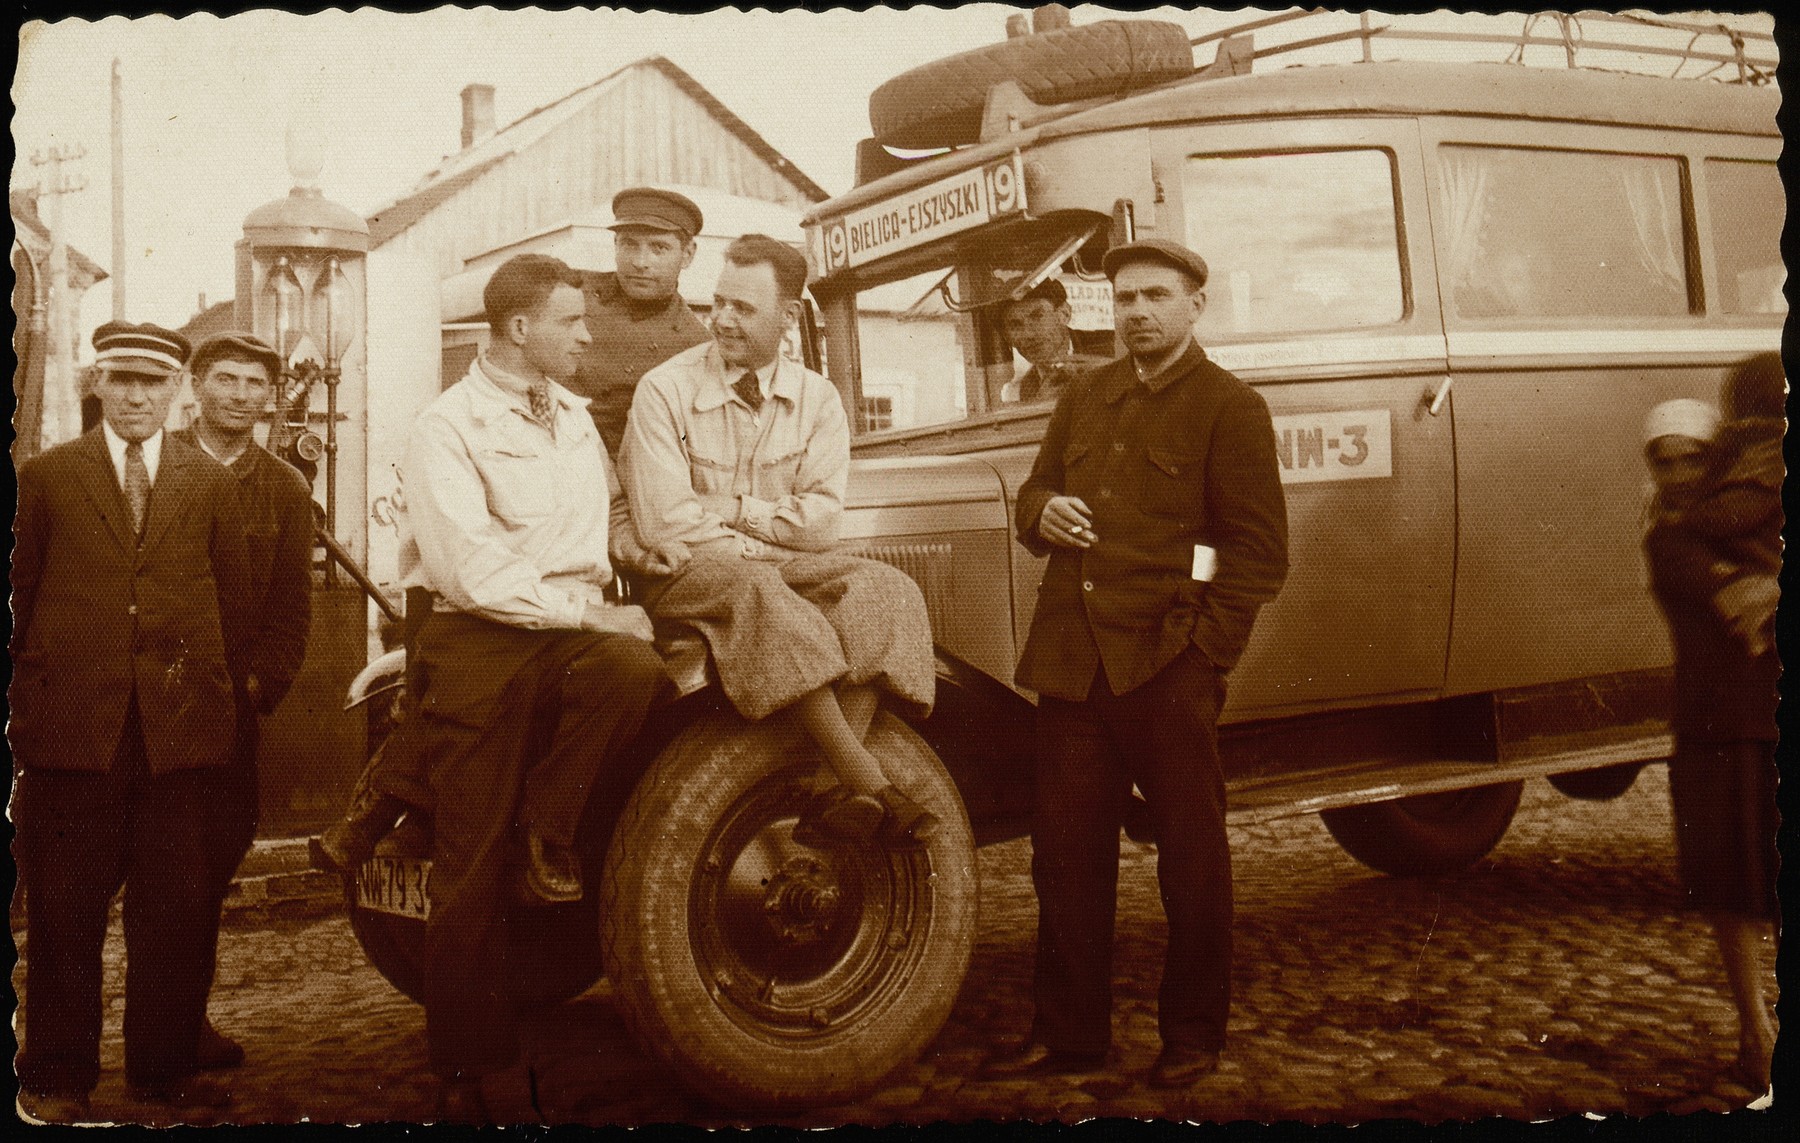 A group of men gather by the Bielica-Ejszyszki bus to Lida at the shtetl bus-stop and gasoline pump. 

(Right  to left)  Moshe Slonimski, in the driver's seat is Israel Erlich, between the two Polish drivers is Yankele Krisilov, the shtetl bus driver, Avraham Asner (uncle of Ed Asner), in front of the gasoline pump and Yankele Krisilov, who survived in Russia.  The others were murdered by the Germans and the AK.